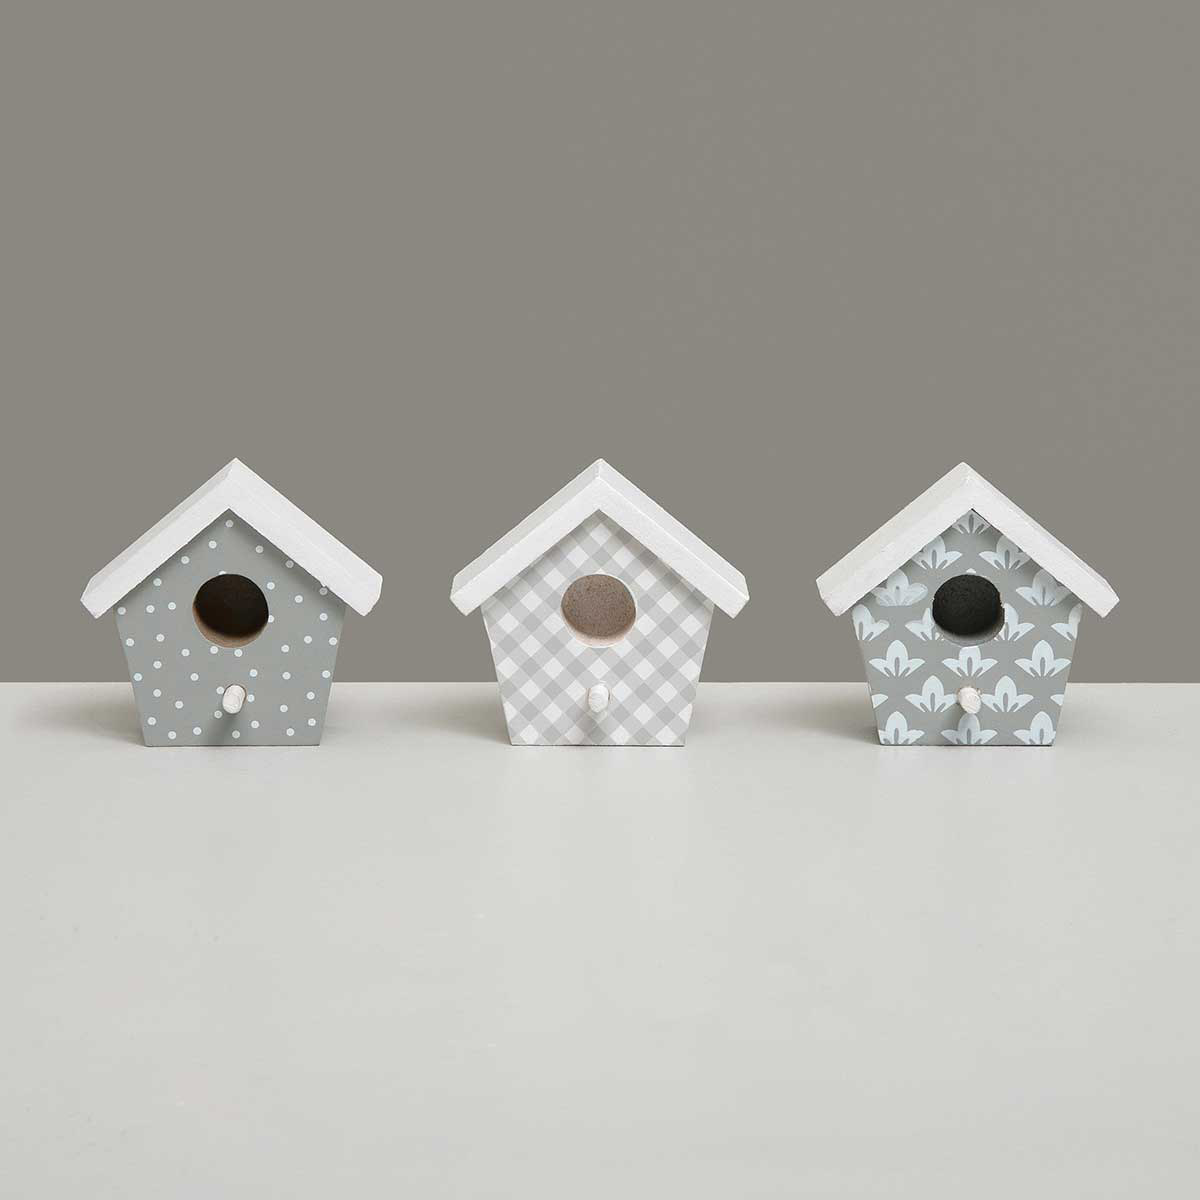 b50 MINI BIRDHOUSE 3 ASSORTED 2.25IN X 1.25IN X 2.25IN WOOD - Click Image to Close